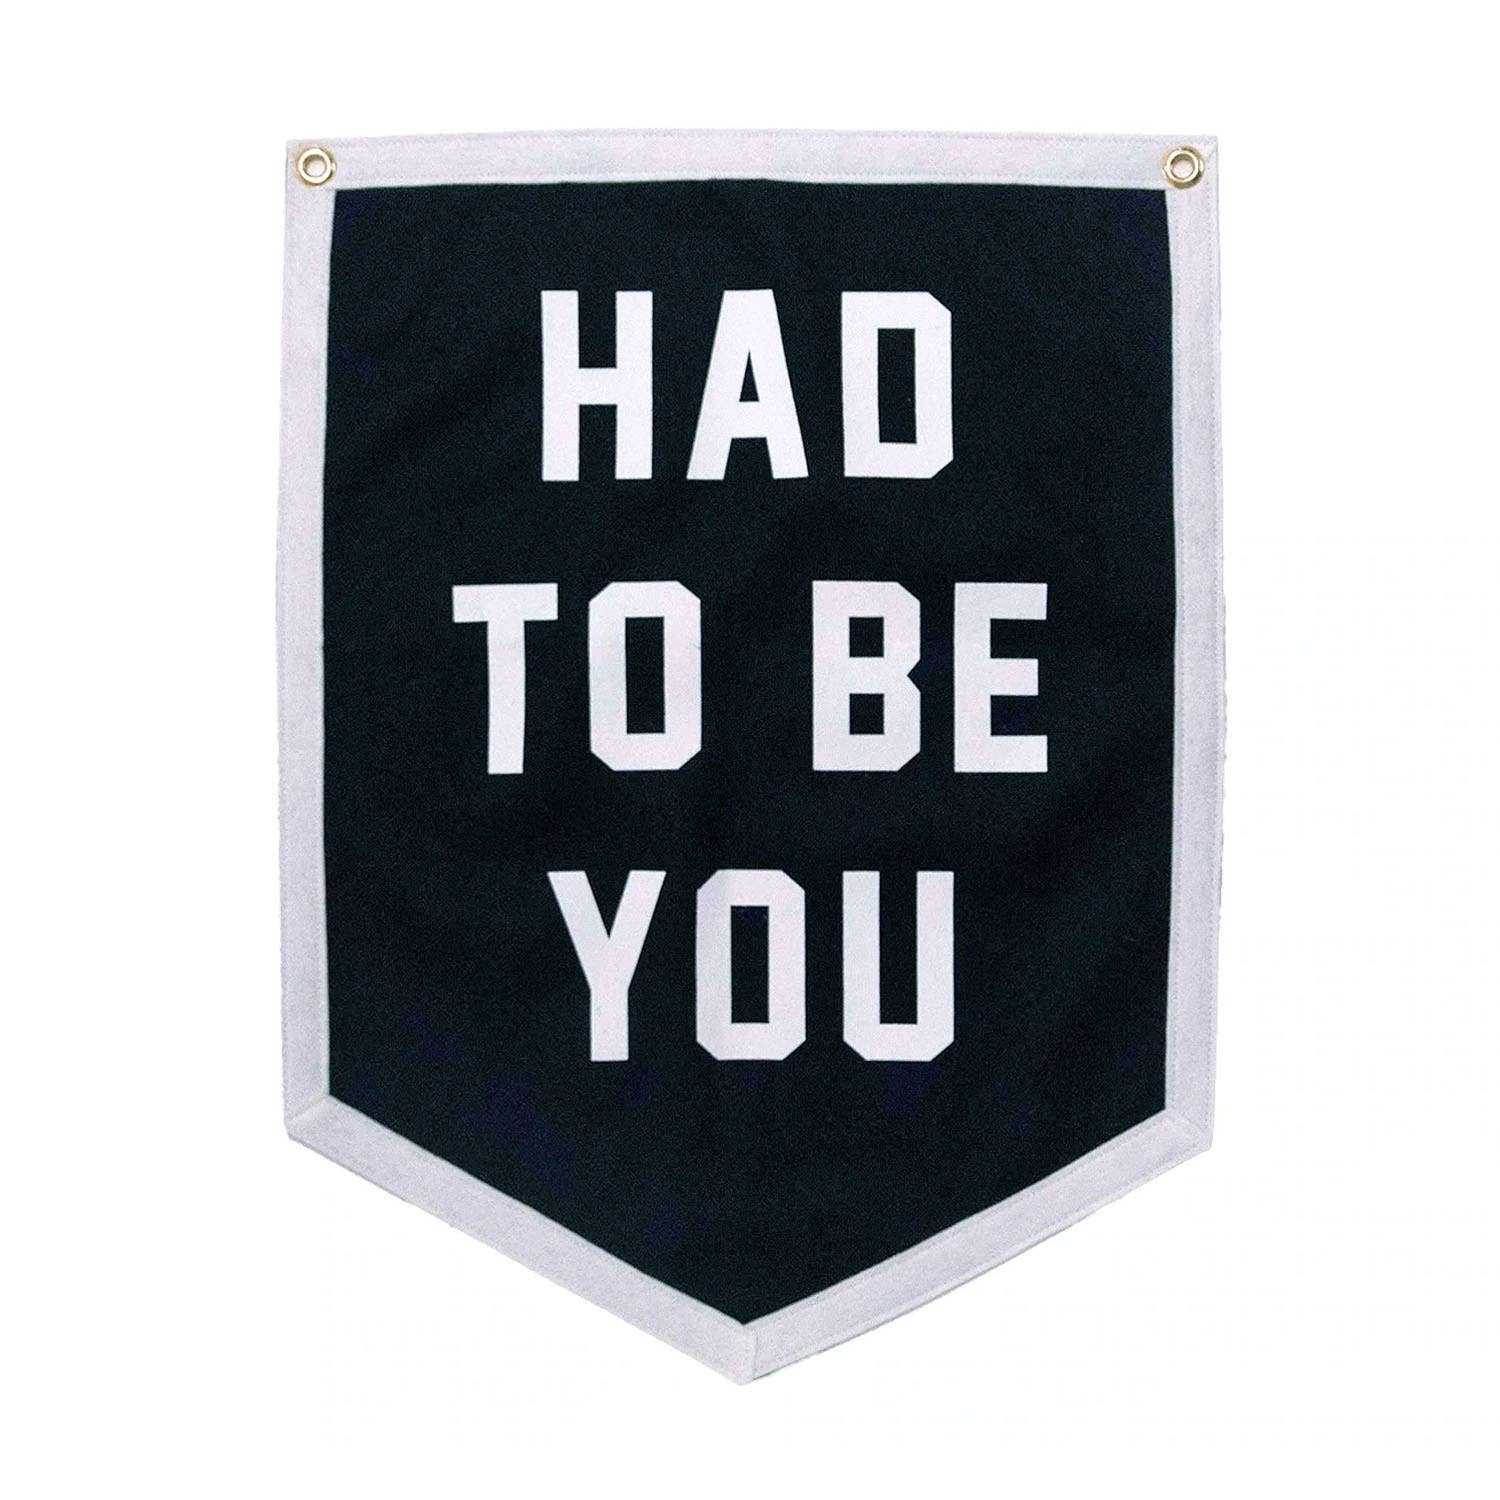 Had to Be You Camp Flag